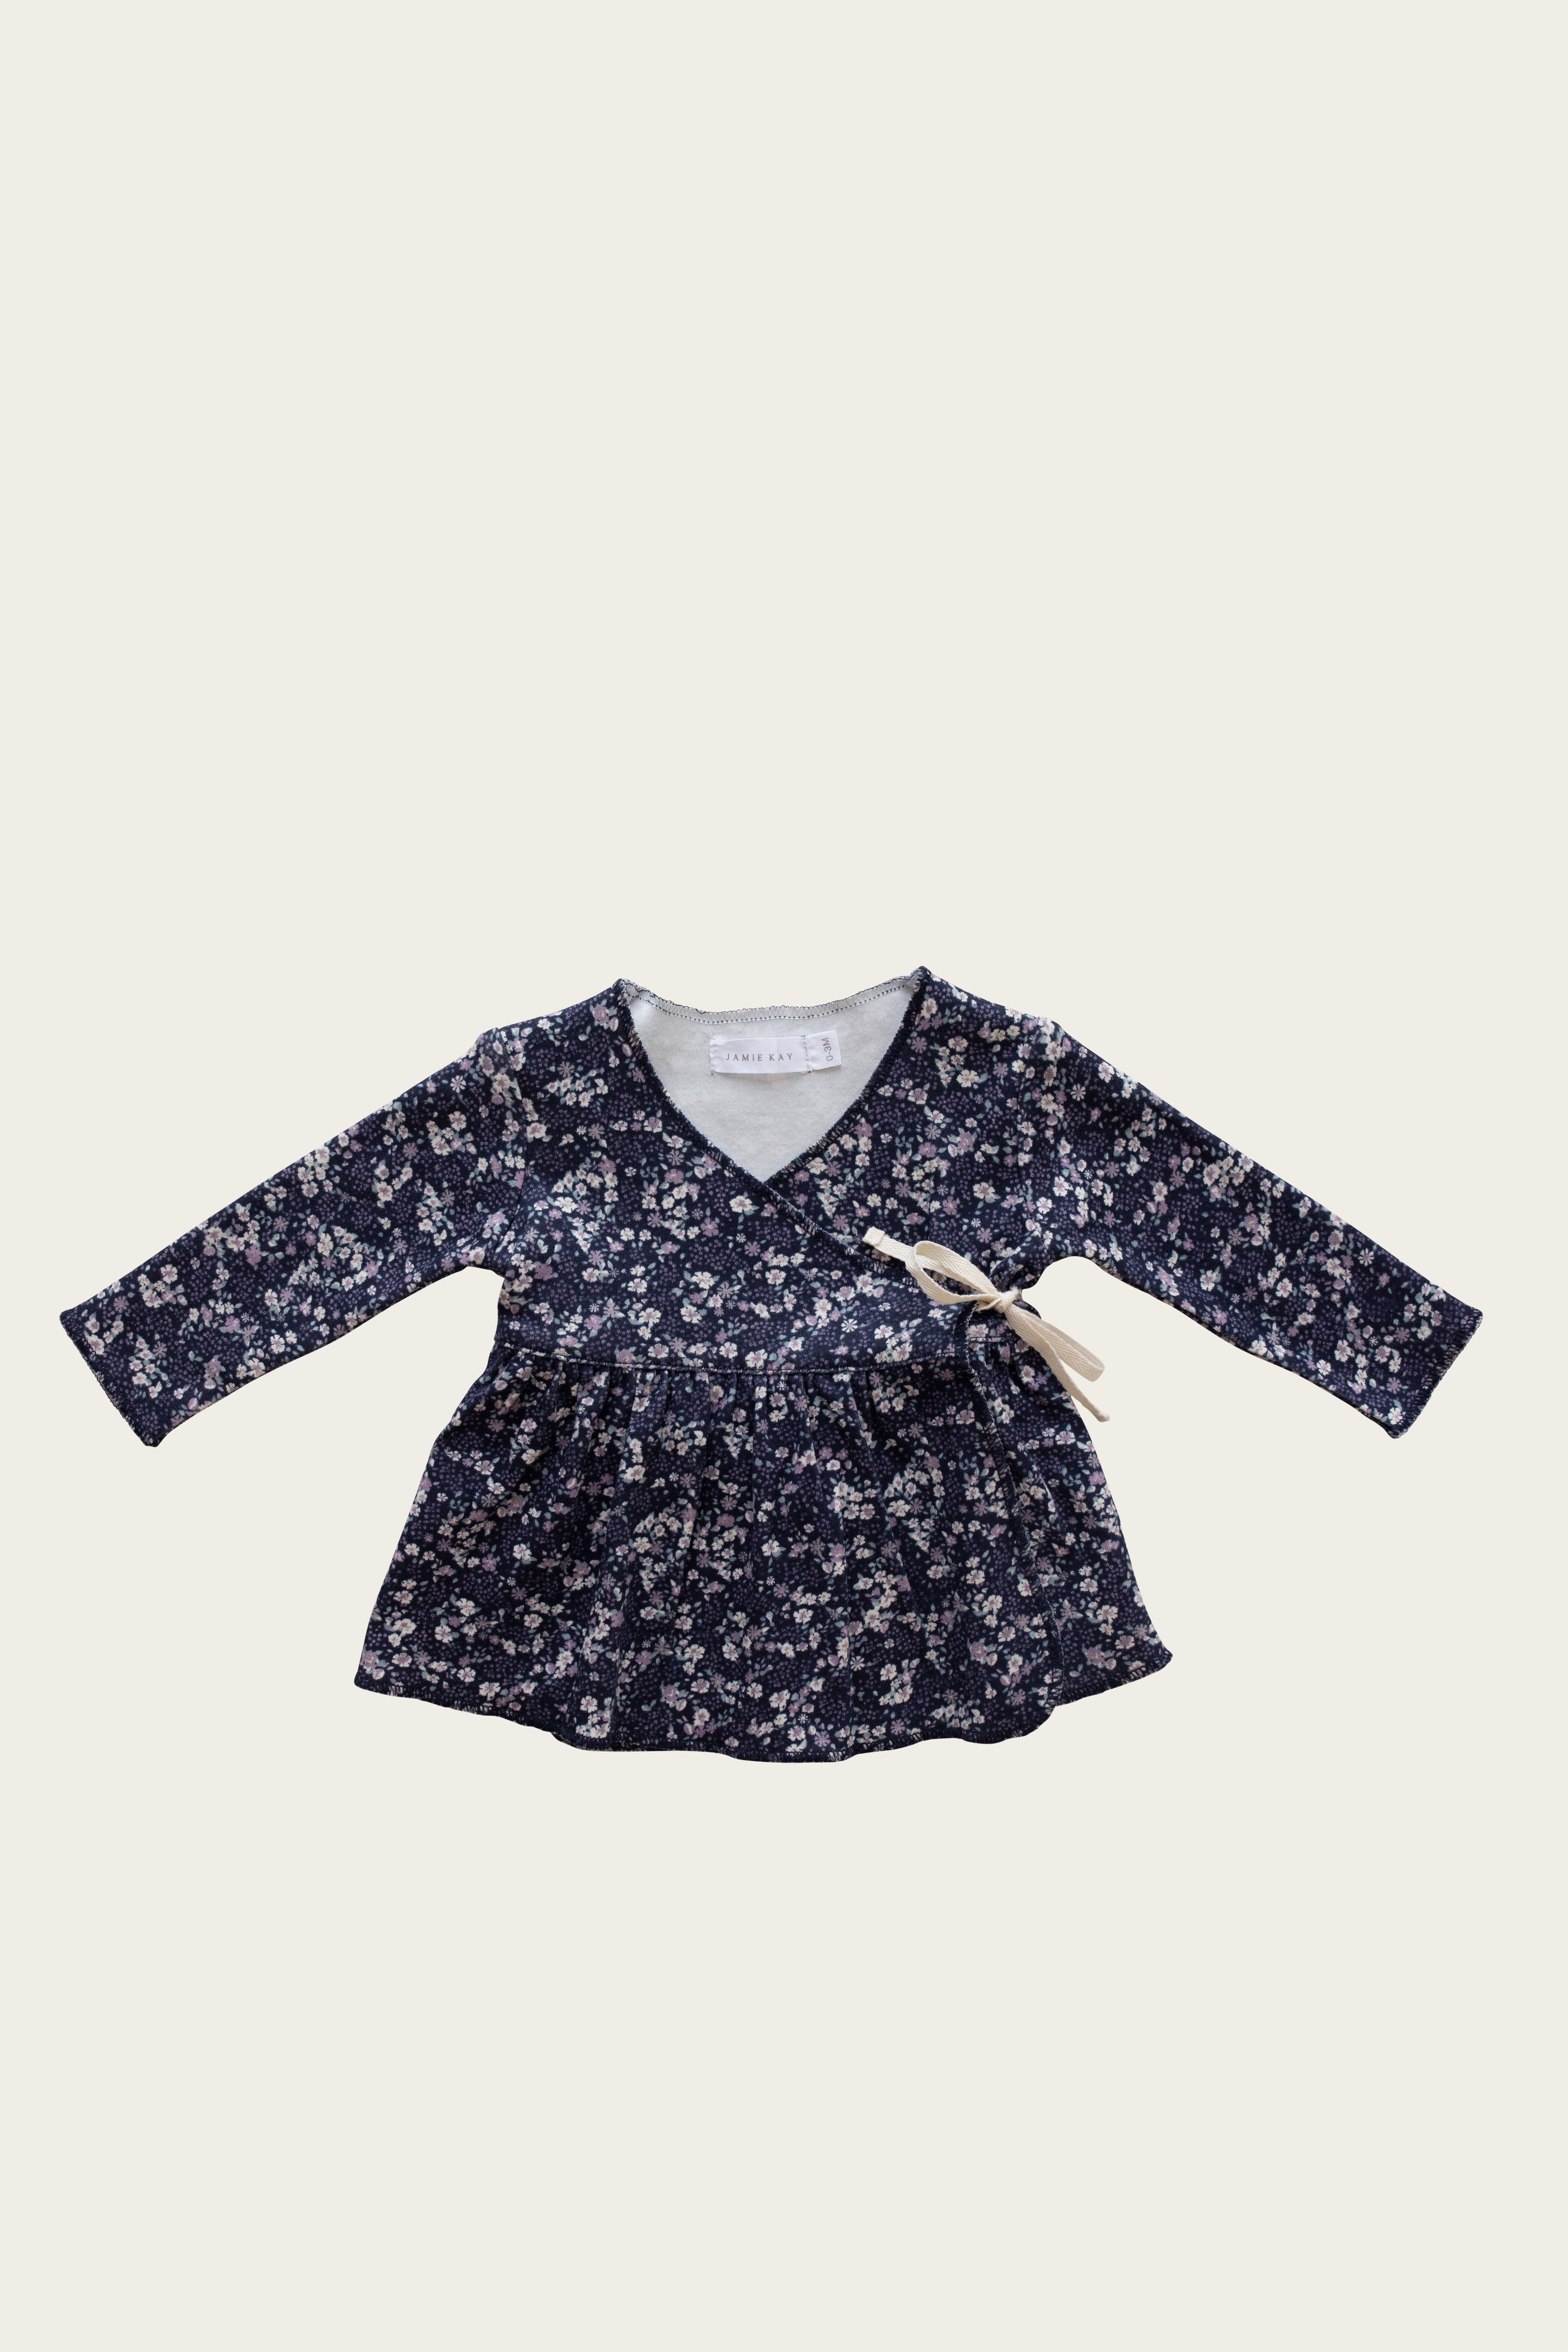 Top Organic Cotton | Floral Wrap Boutique Barn Jamie Blueberry Kay Chic |